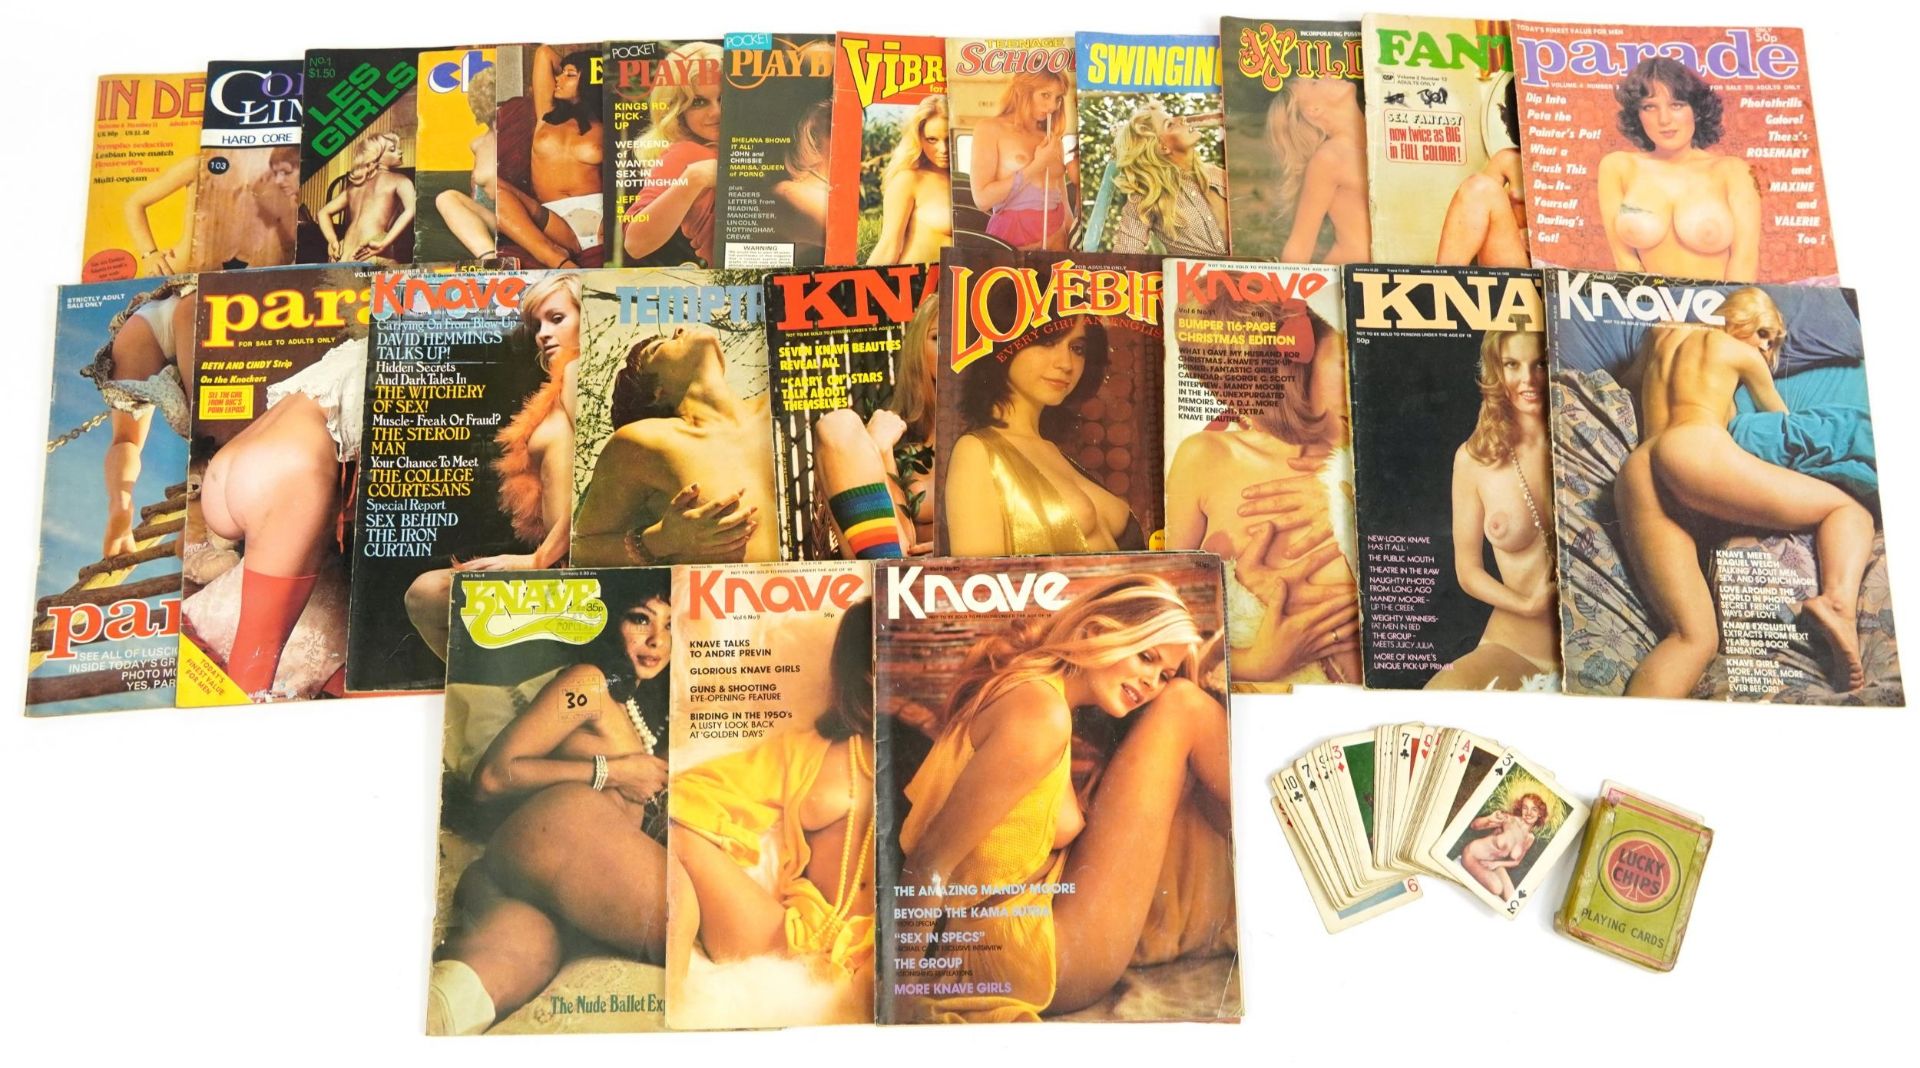 Collection of vintage adult erotic magazines including Play Birds, Fantasy, Parade, Wild Cats and